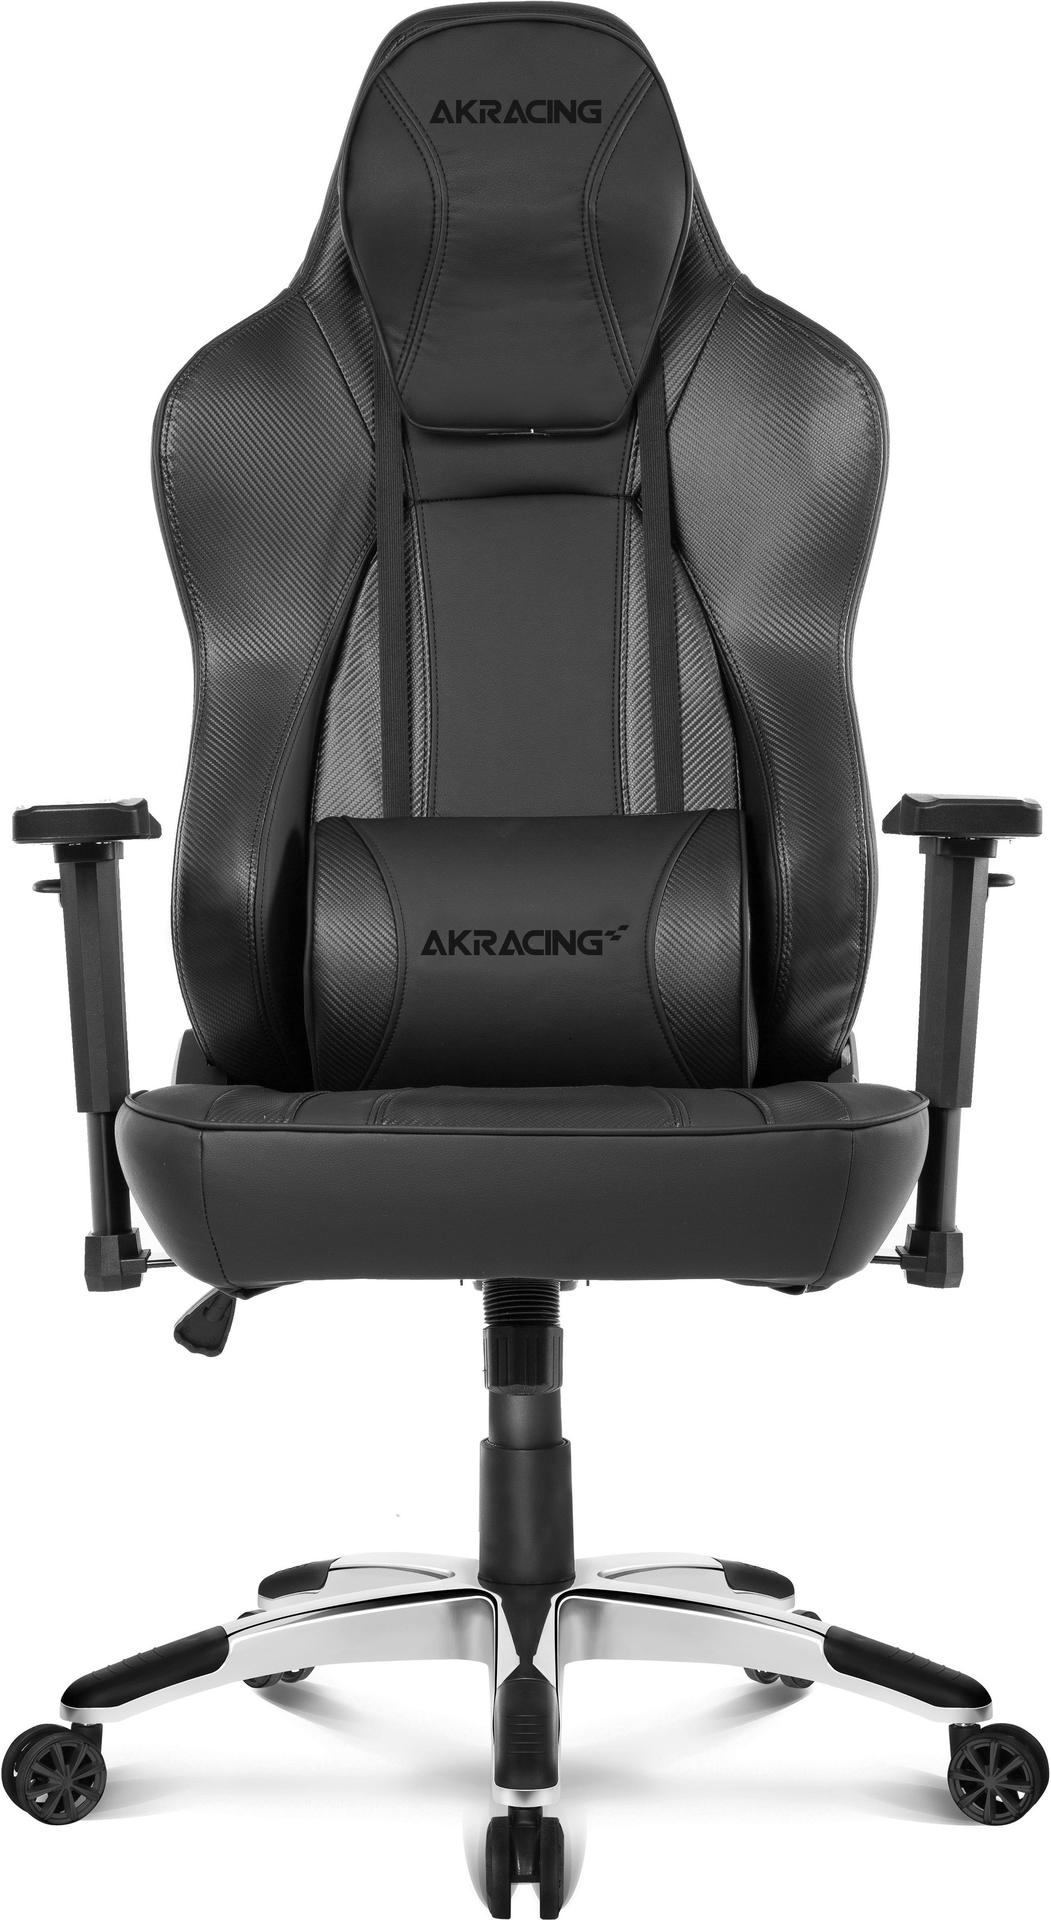 AKRacing Gaming Chair AK Racing Office PU Leather Obsidian/Carbon Blk (AK-OBSIDIAN)